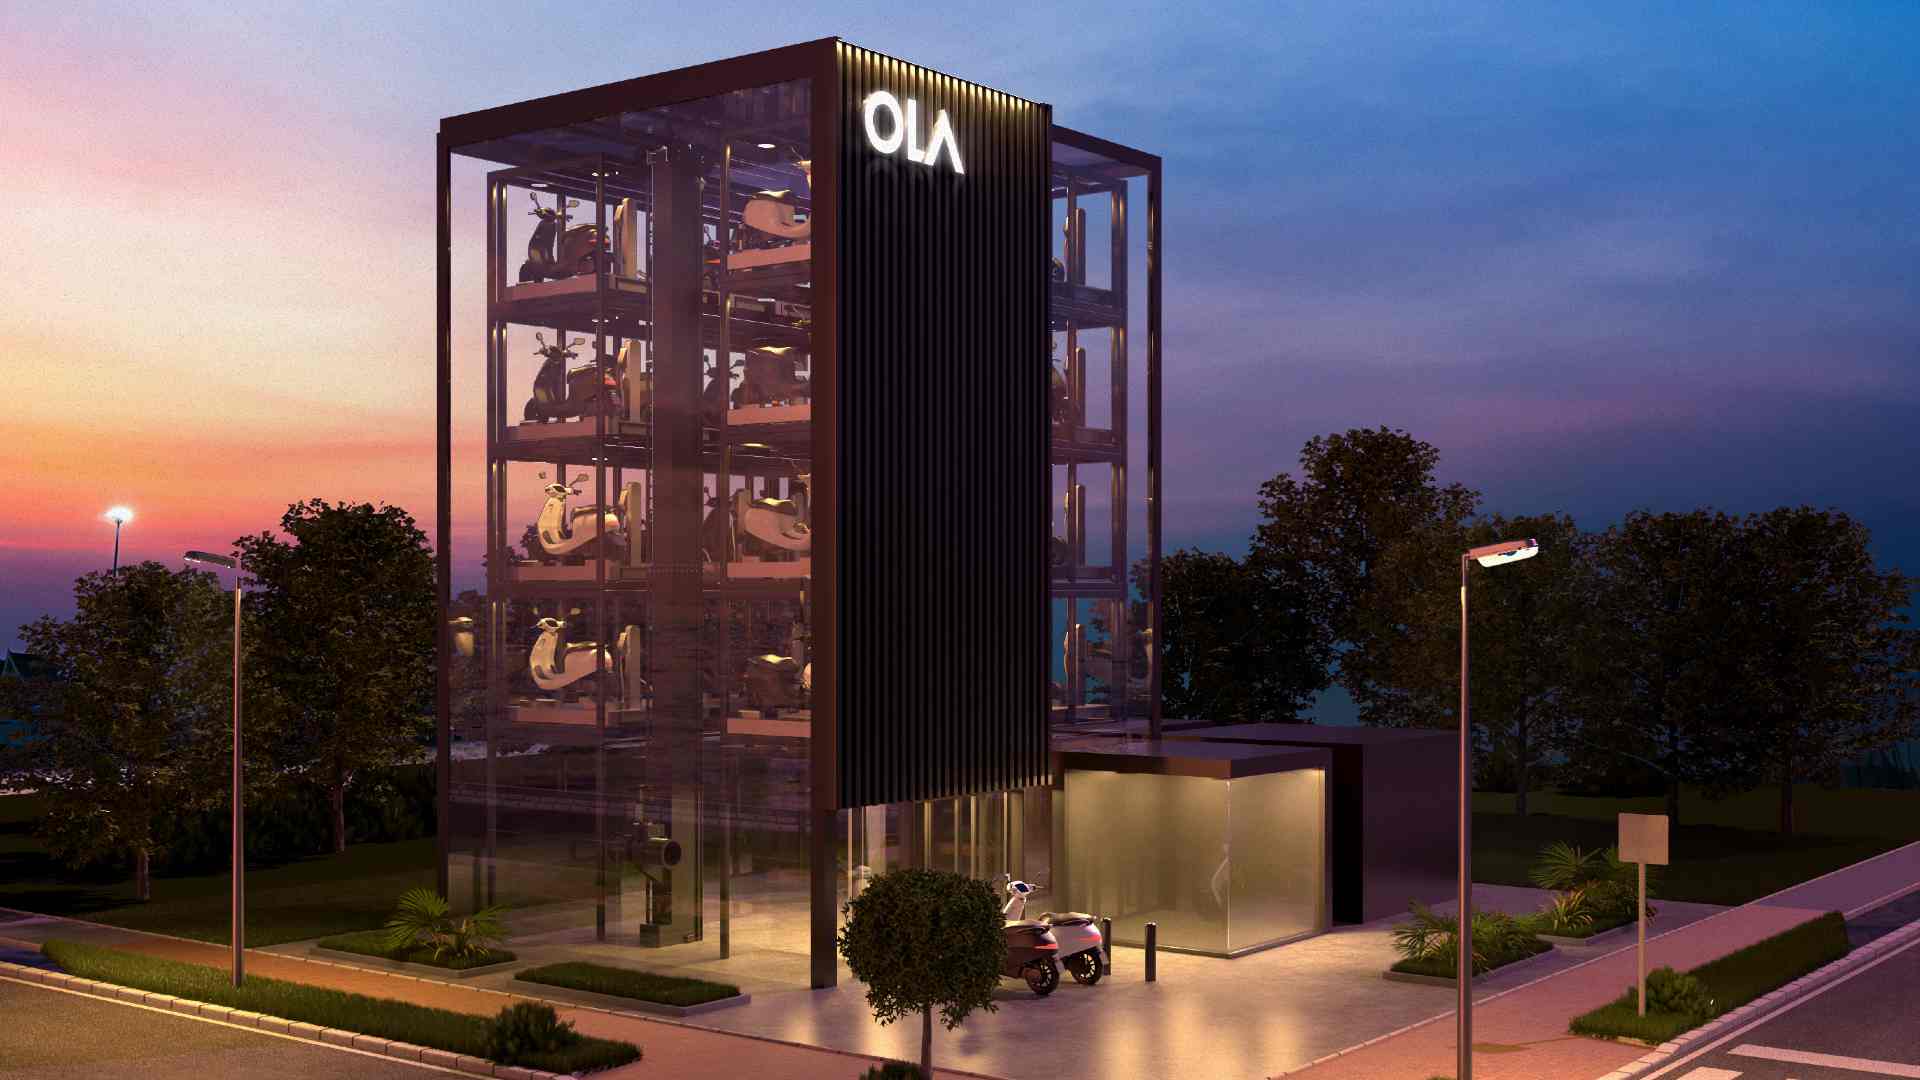 Ola Electric's standalone charging towers will feature automated multi-level parking. Image: Ola Electric